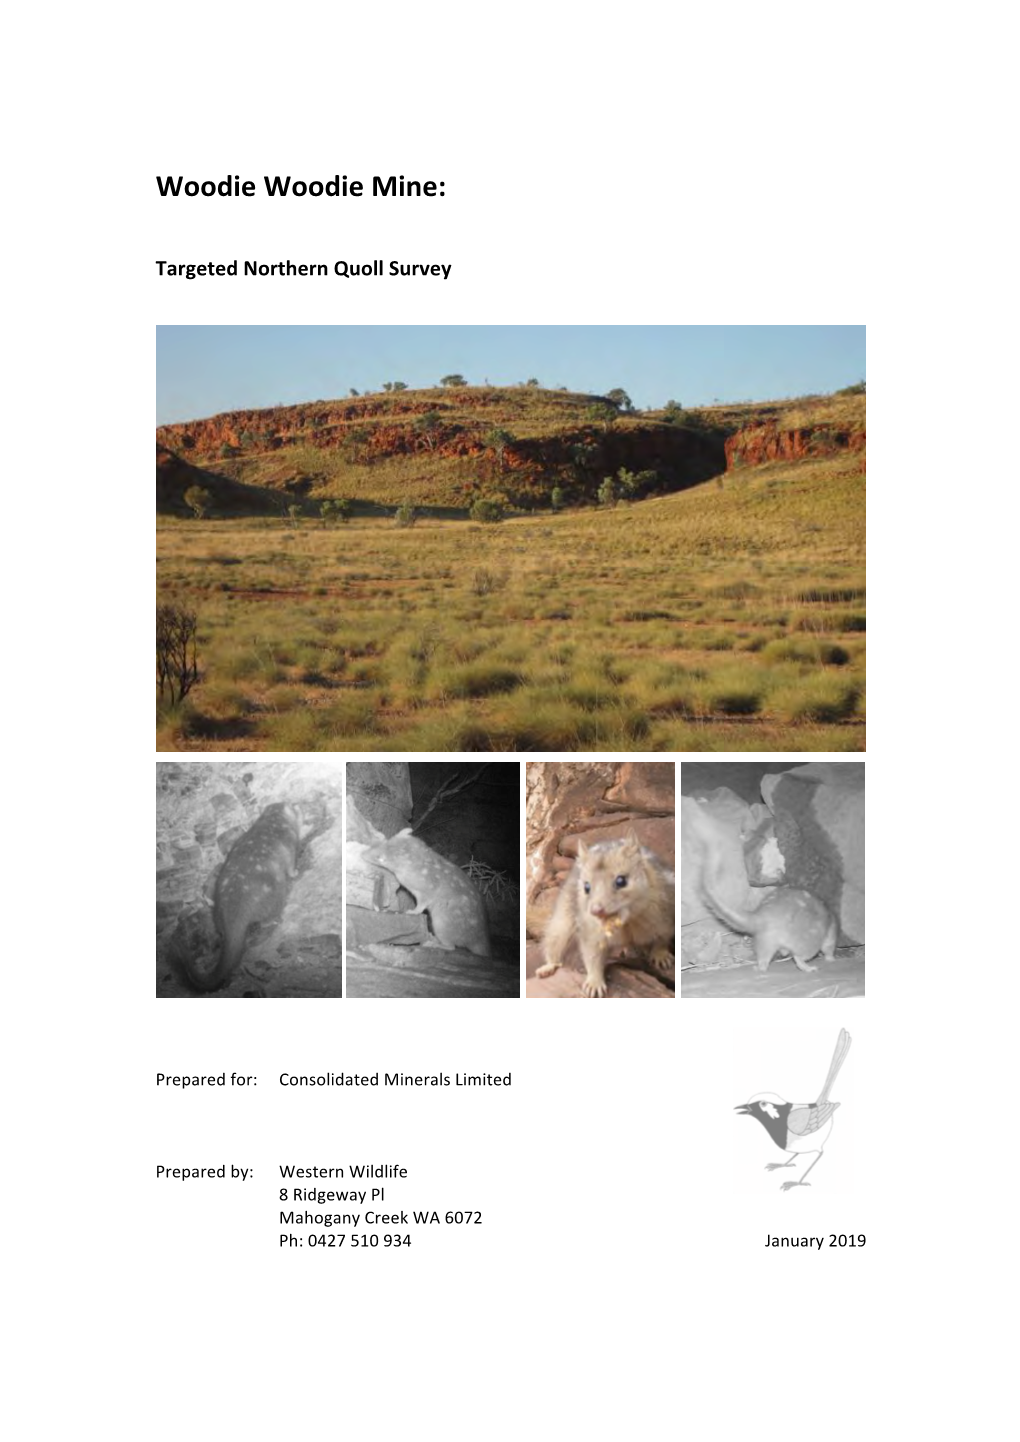 Targeted Northern Quoll Survey